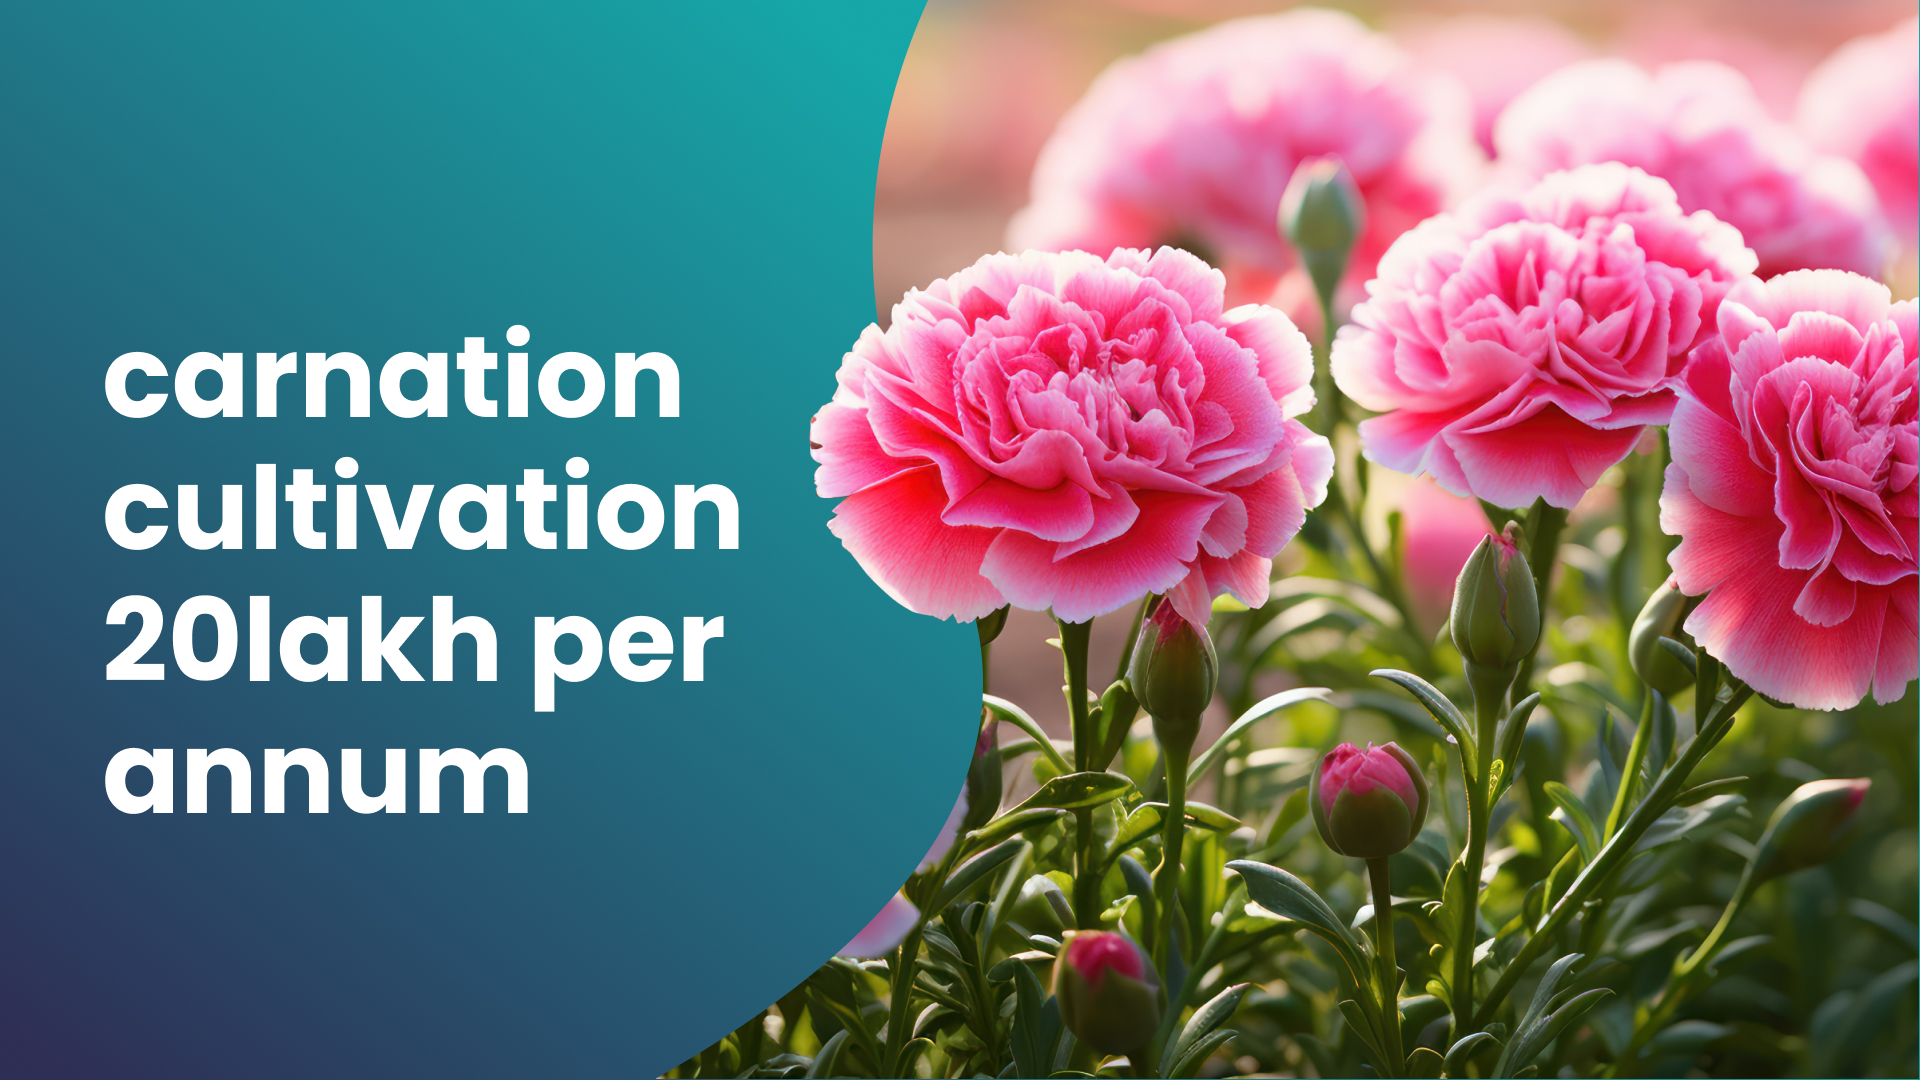 Course Trailer: Earn up to 20 Lakh per year in Carnation Flower Farming from 1/4 acre. Watch to know more.